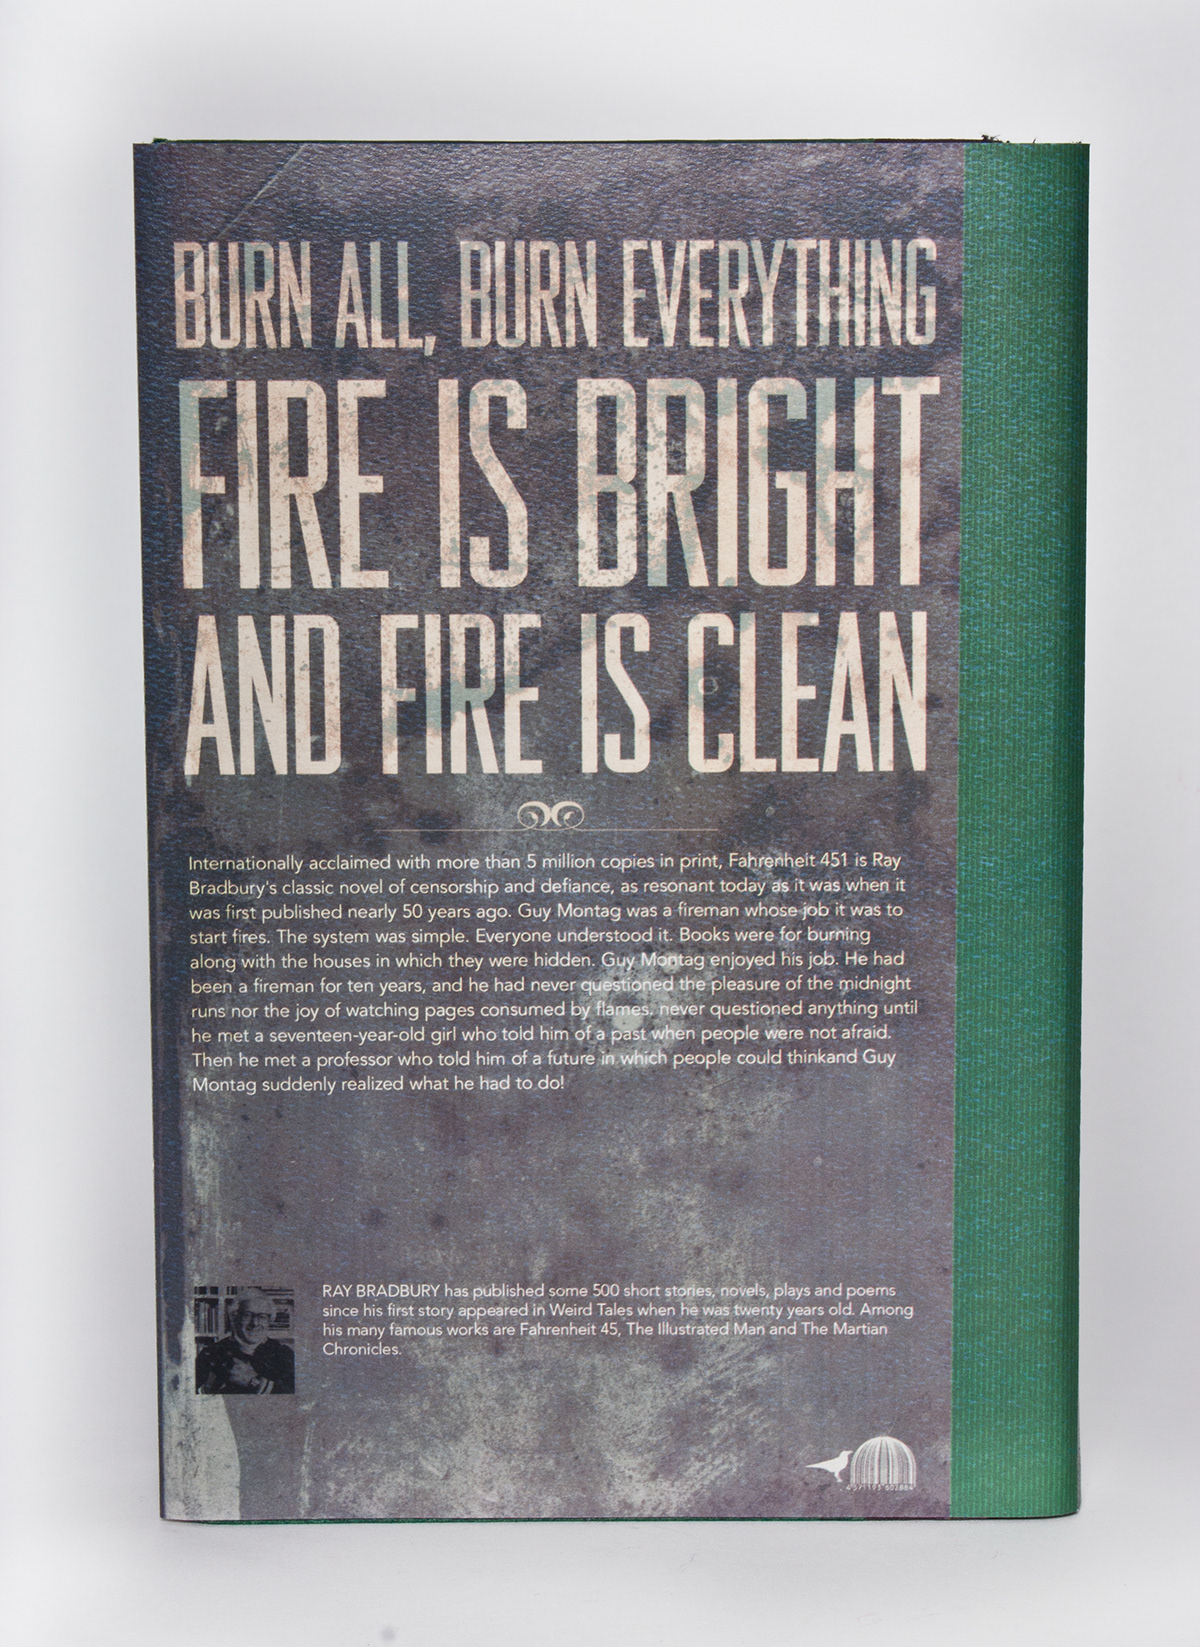 brave new world Fahrenheit 451 book jackets book covers design Dystopian